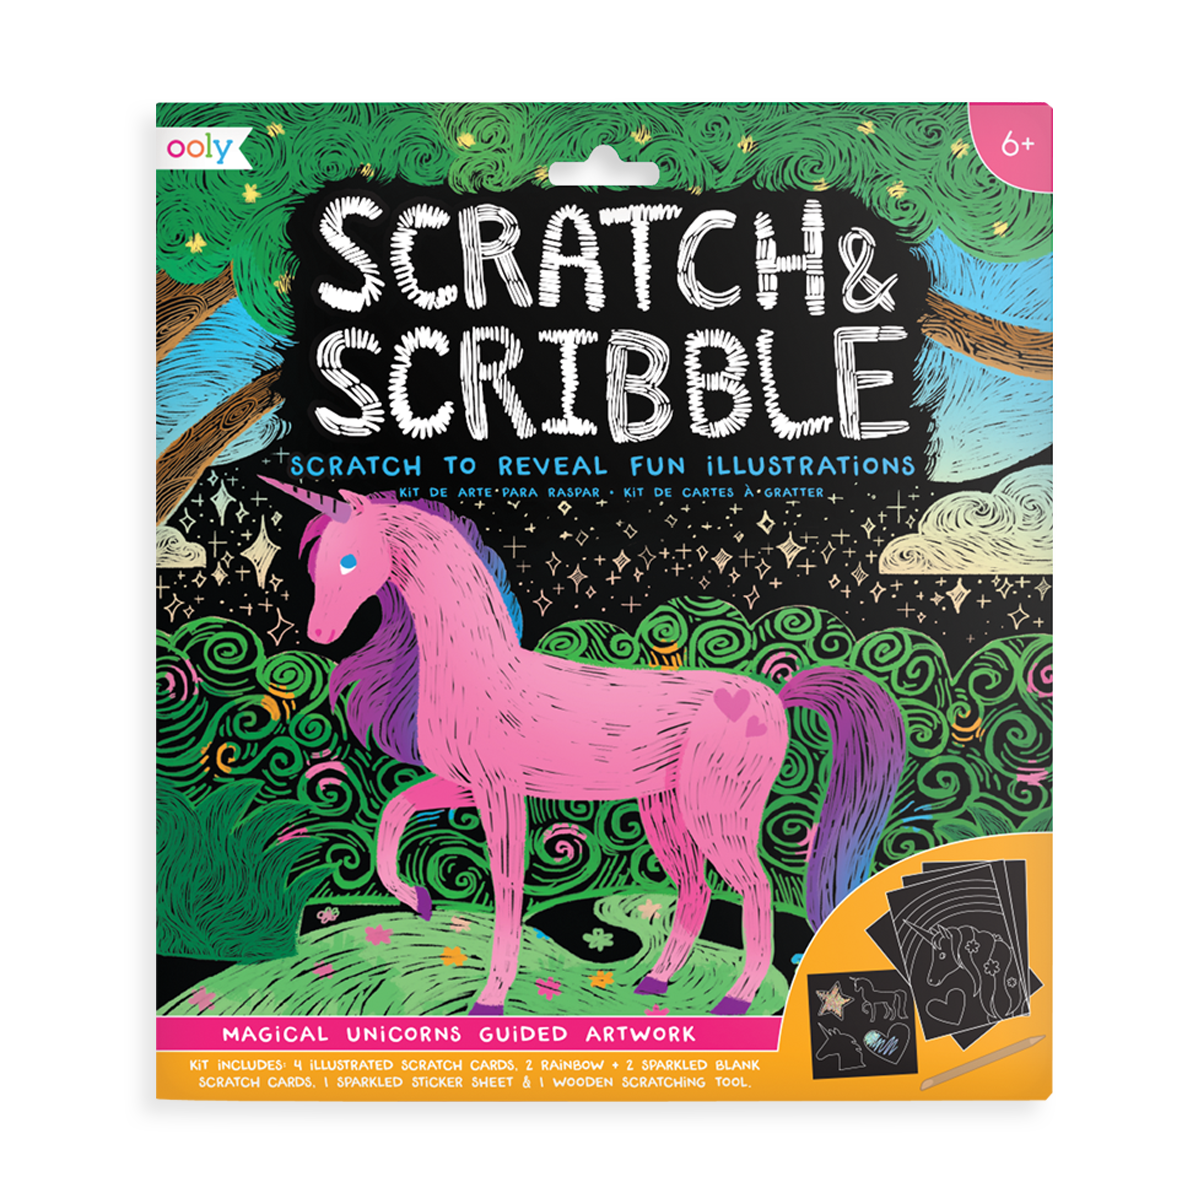 OOLY Magical Unicorn Scratch and Scribble Scratch Art Kit Art Kits